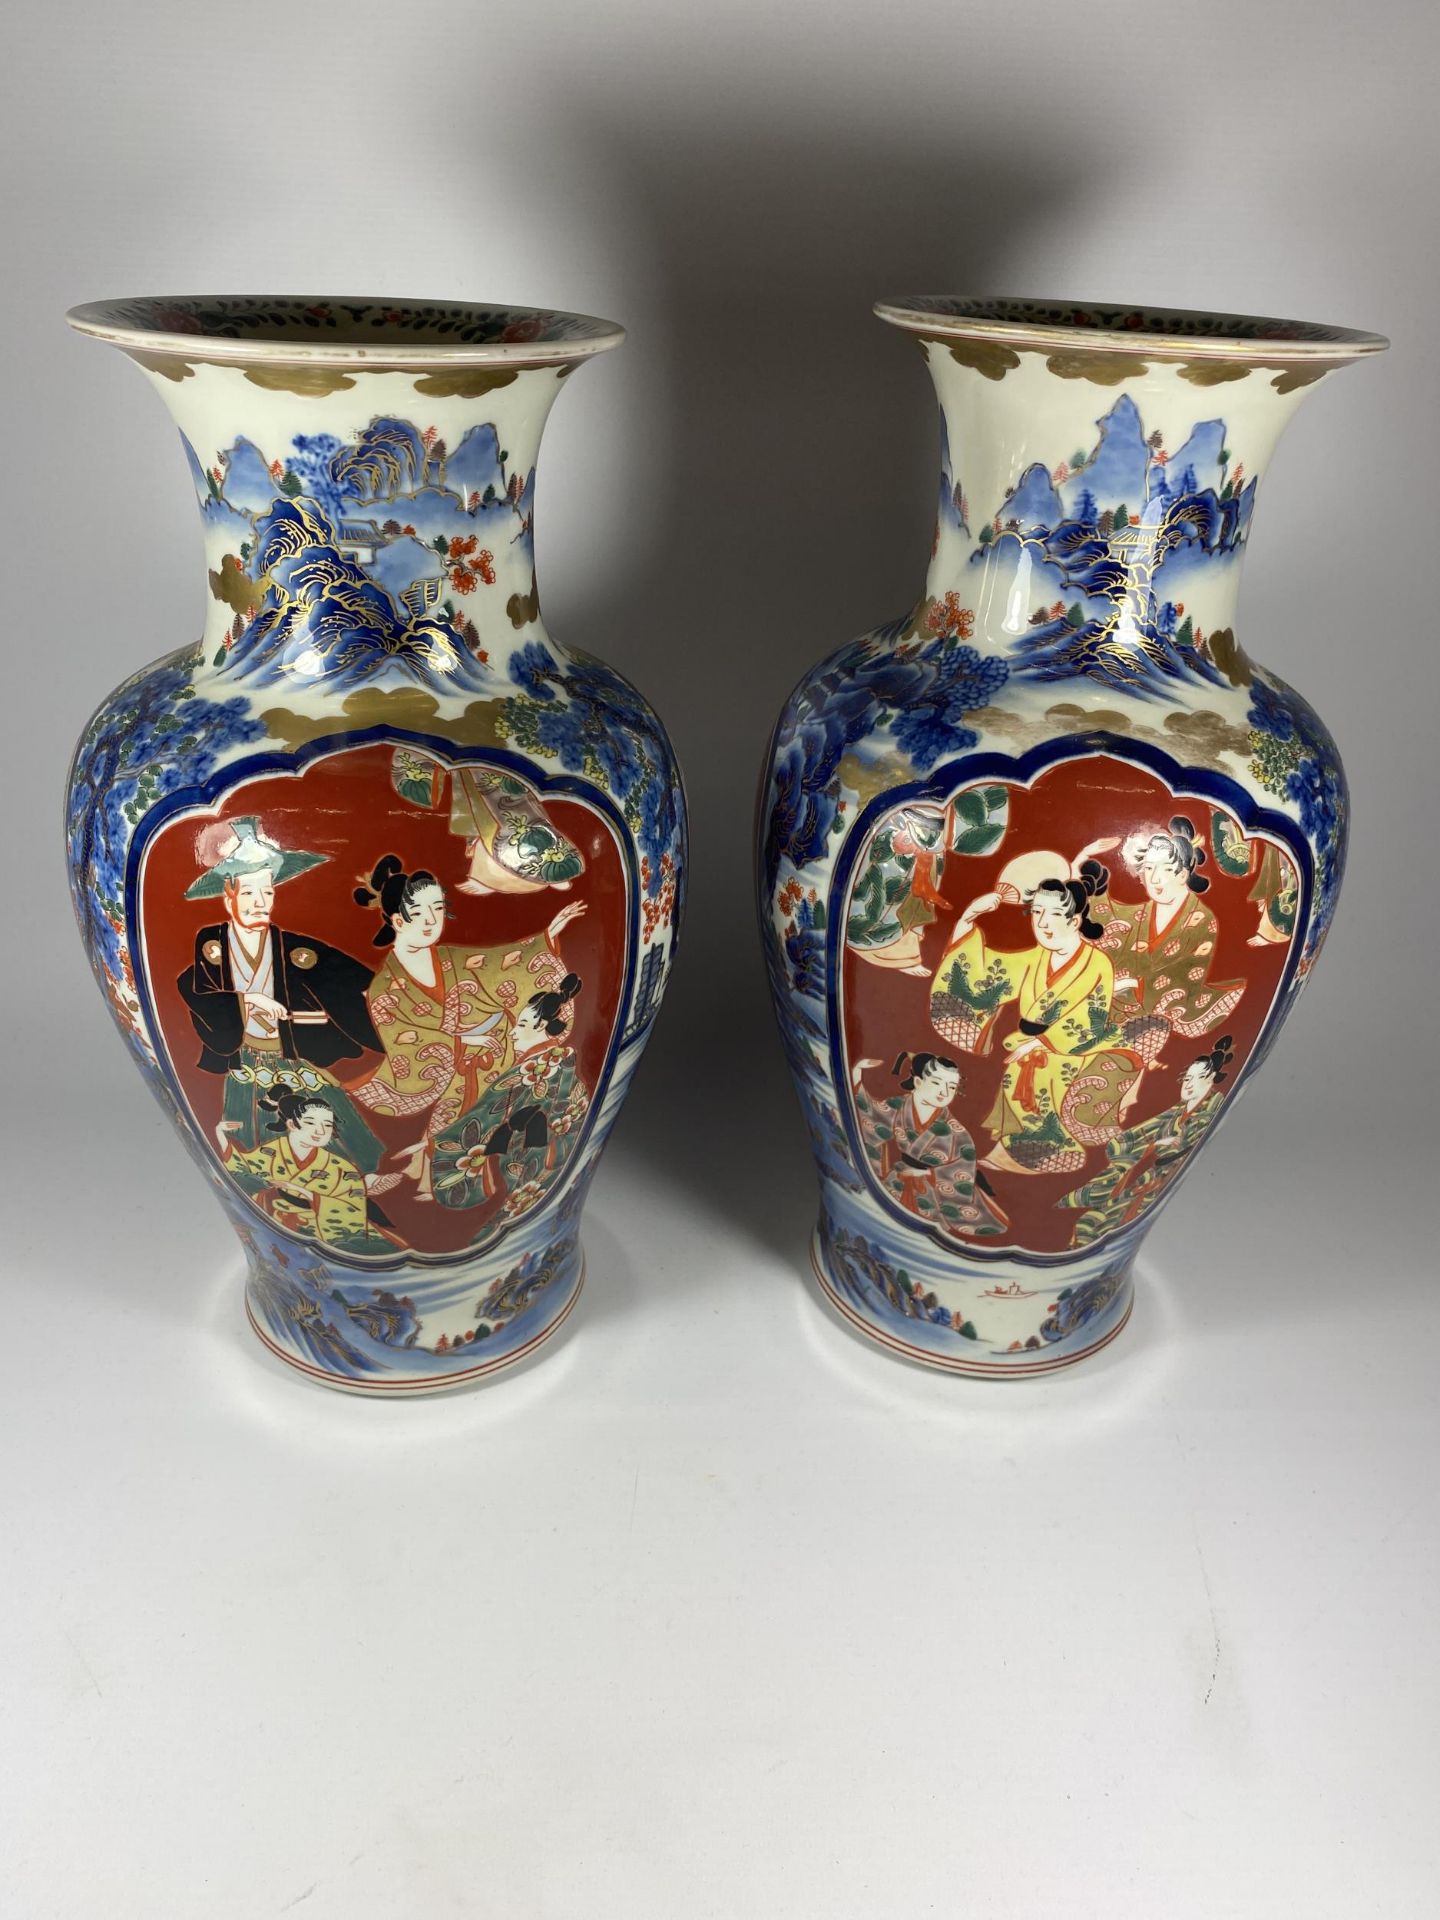 A LARGE PAIR OF JAPANESE MEIJI PERIOD (1868-1912) VASES WITH FIGURAL PANELS ON A MOUNTAIN - Image 5 of 6